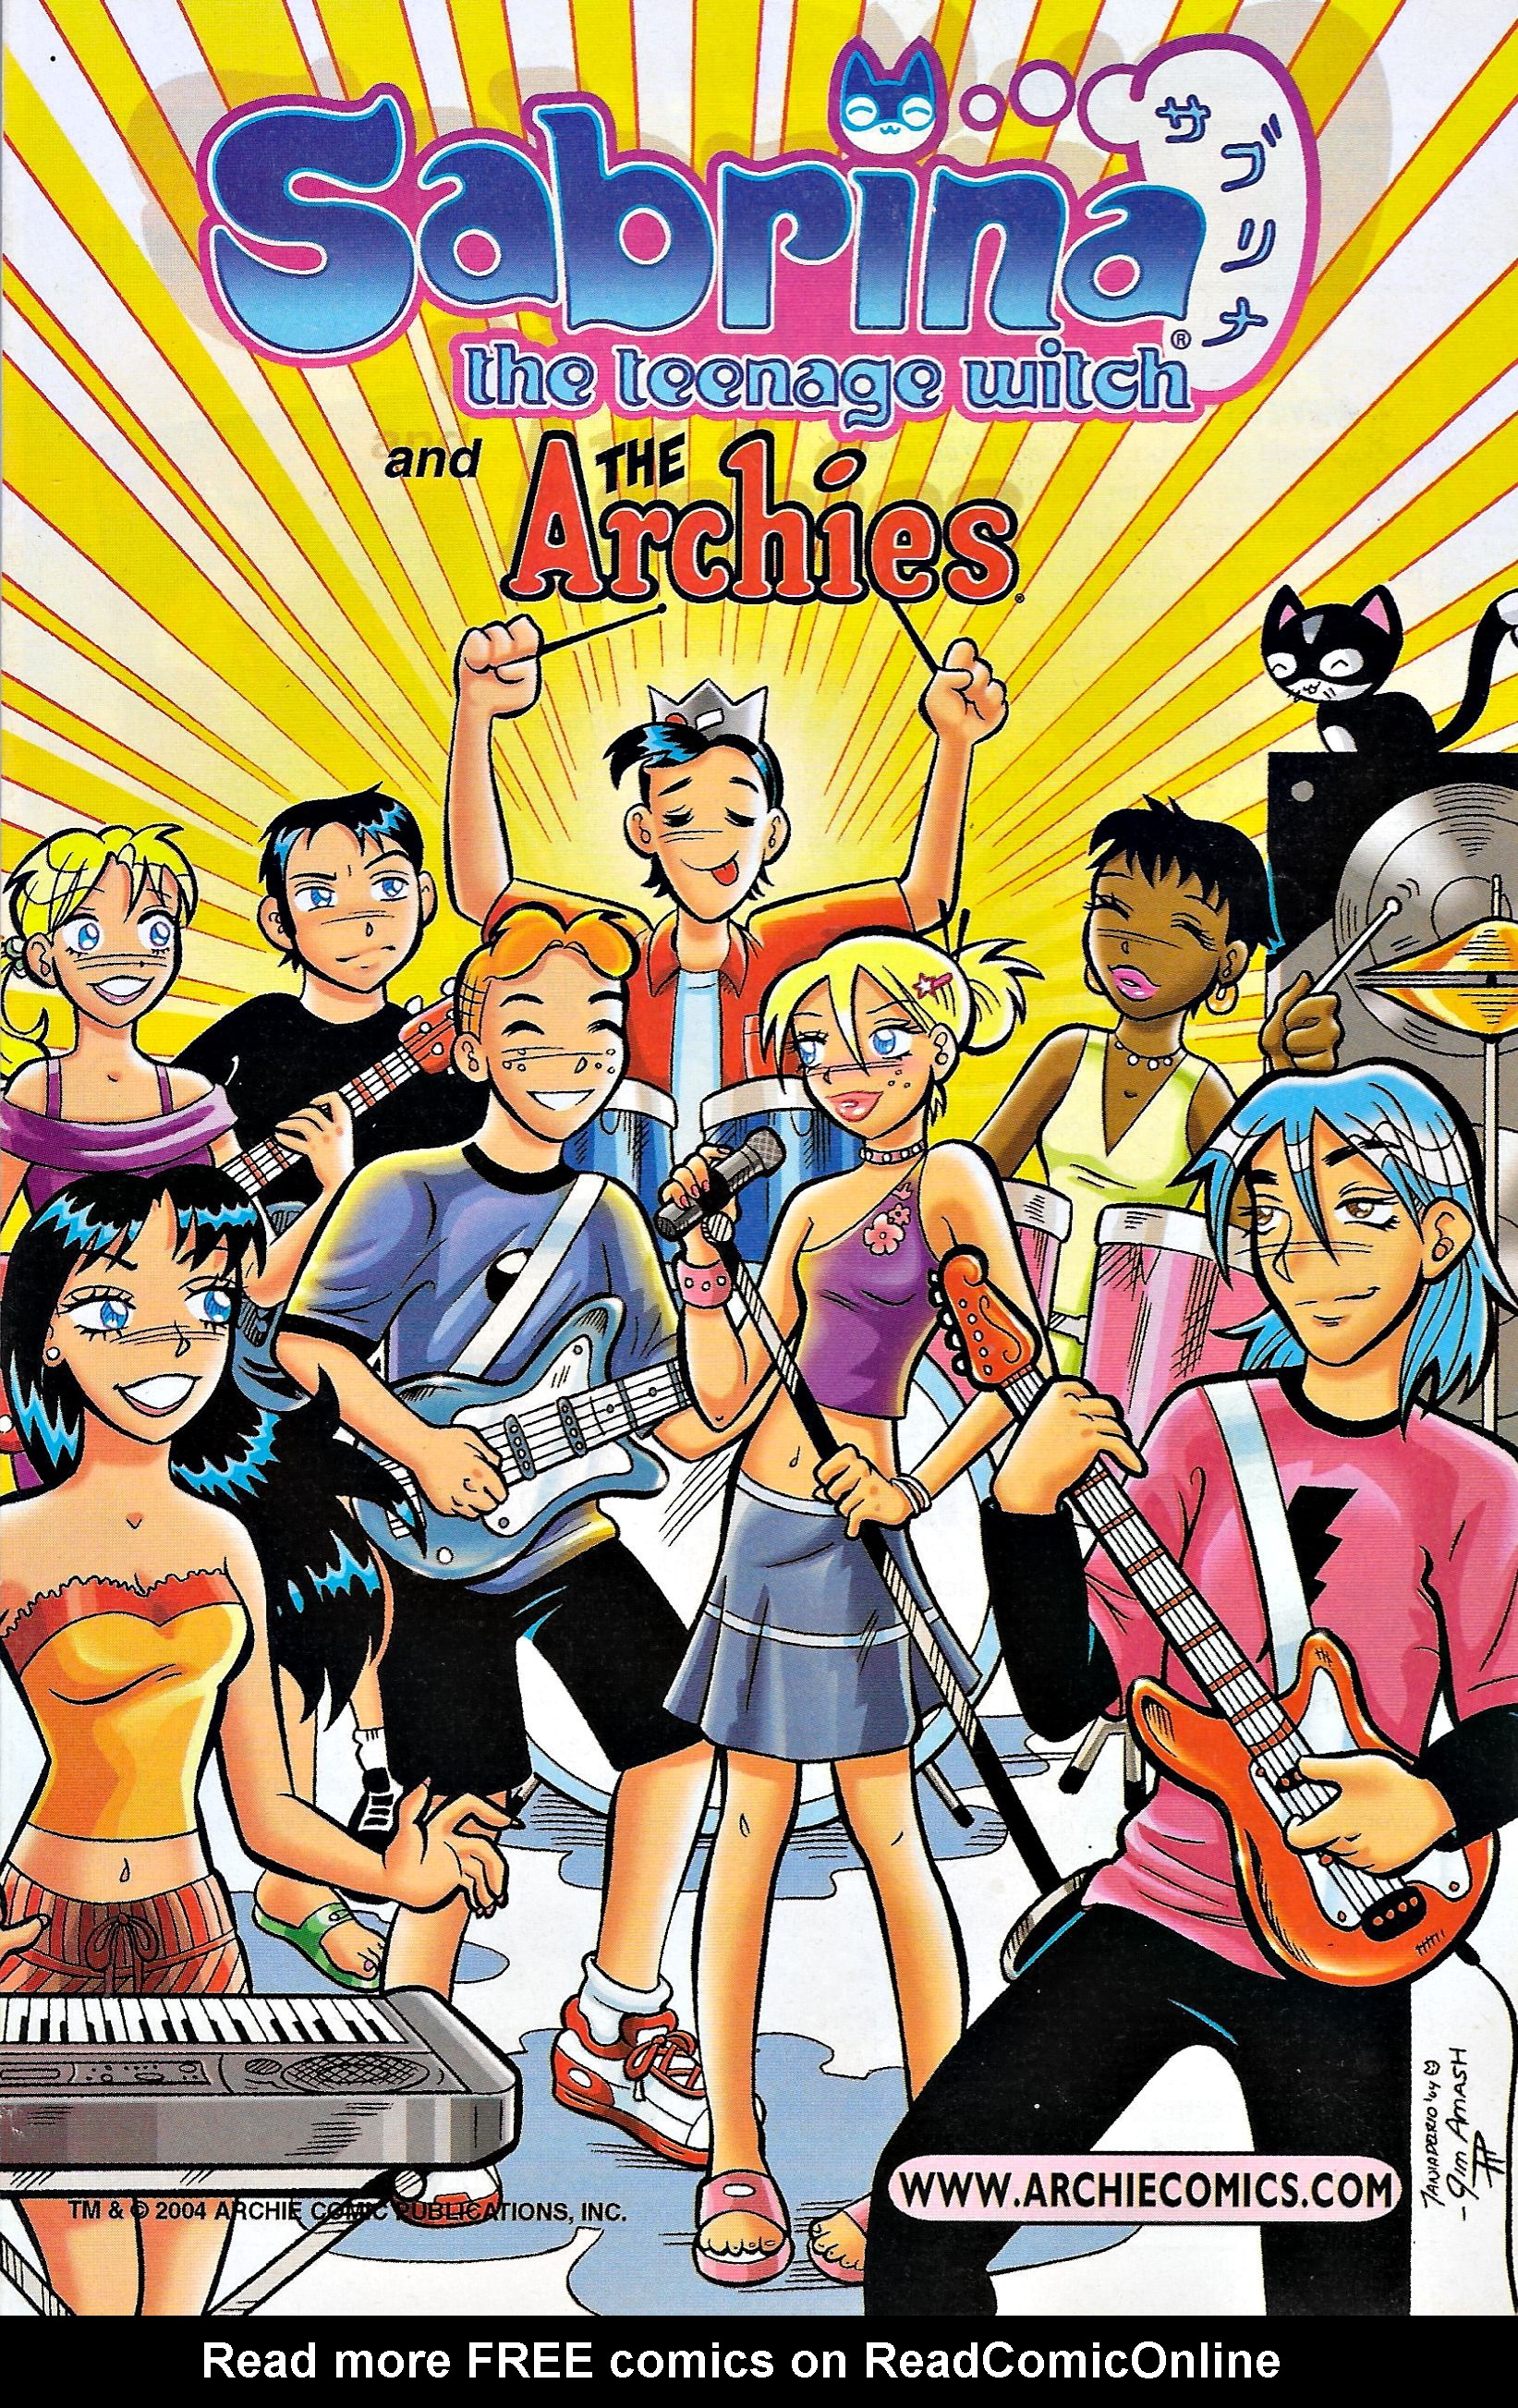 Read online Sabrina the Teenage Witch and the Archies comic -  Issue # Full - 1